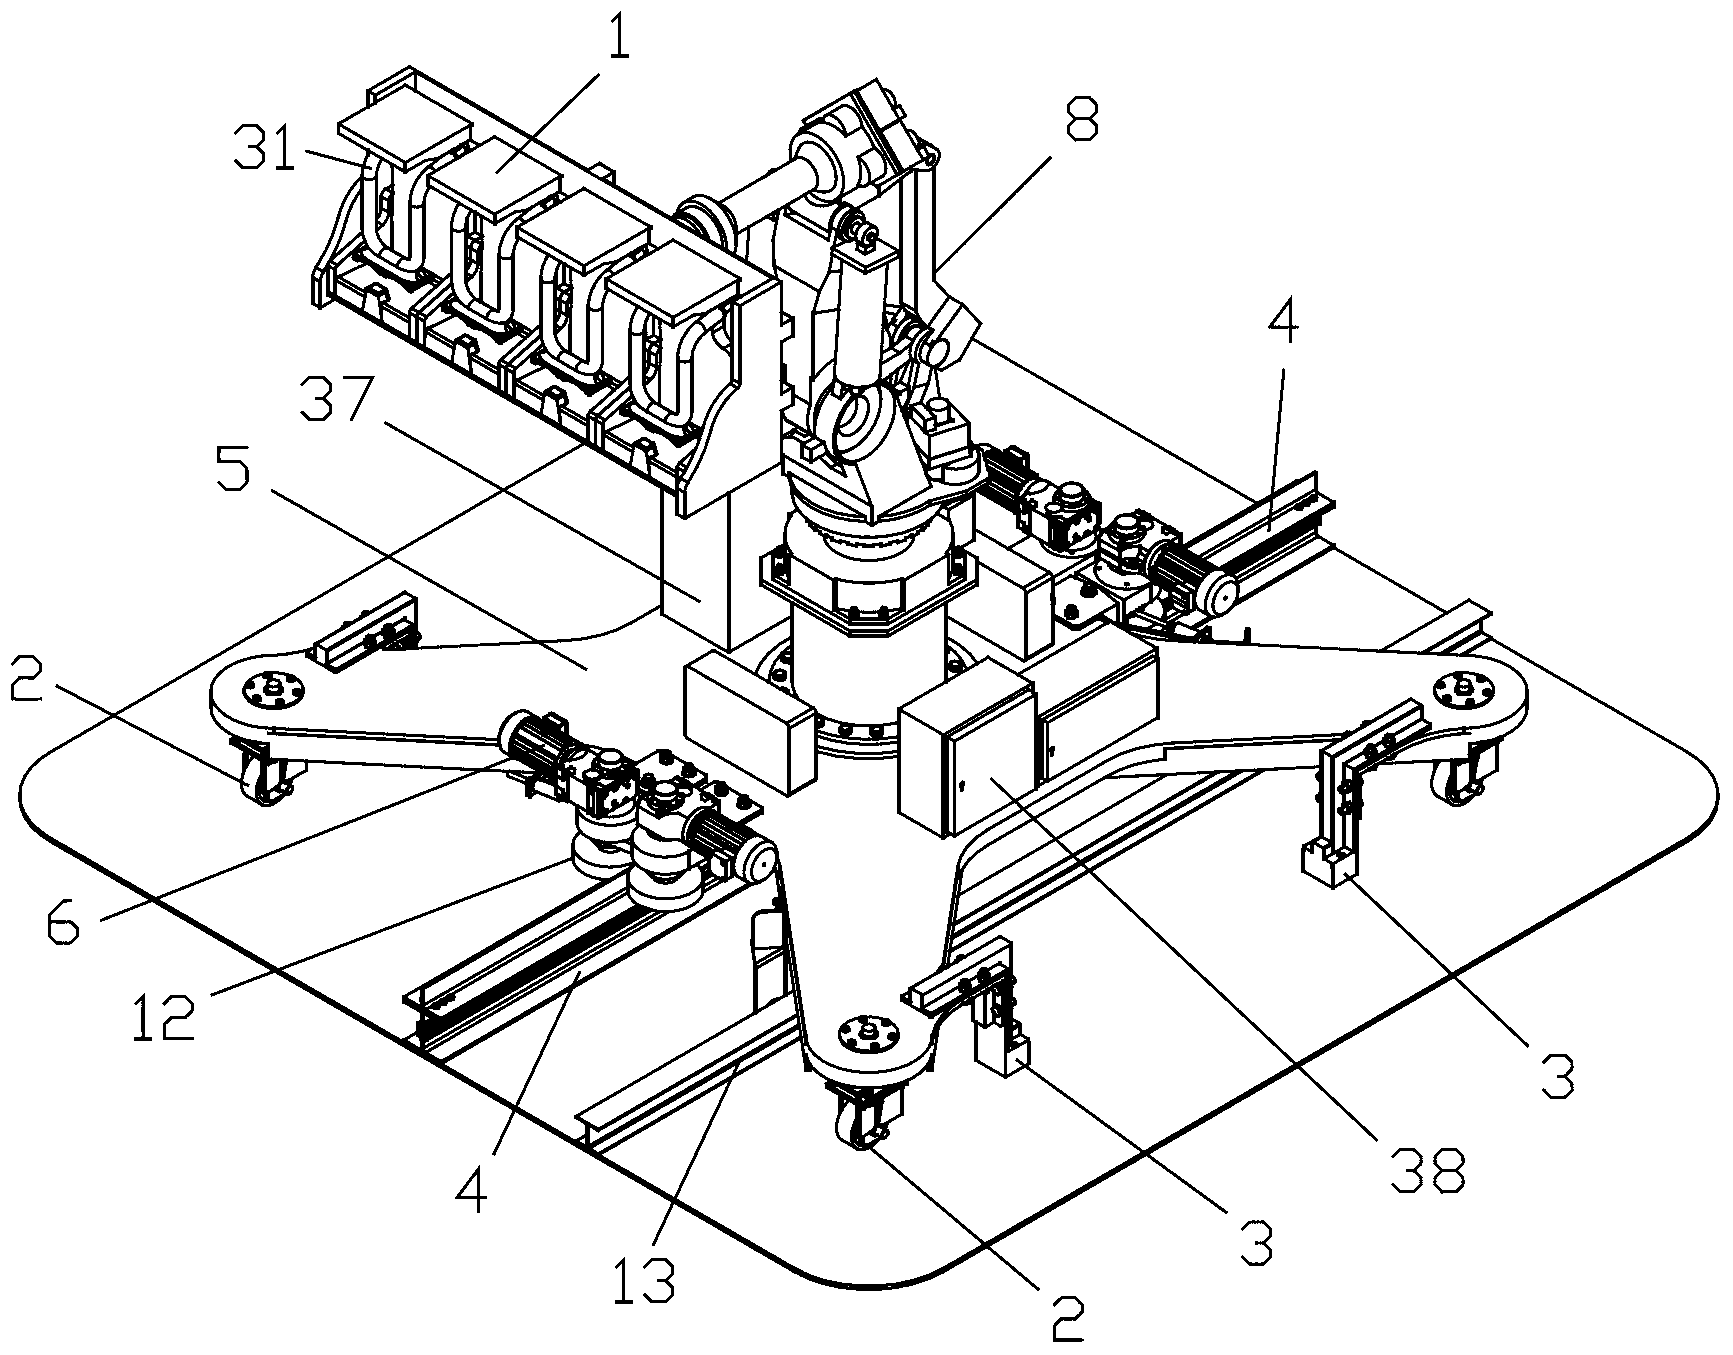 Large engine-driven multi-degree of freedom (DOF) ride-on type entertainment experience device